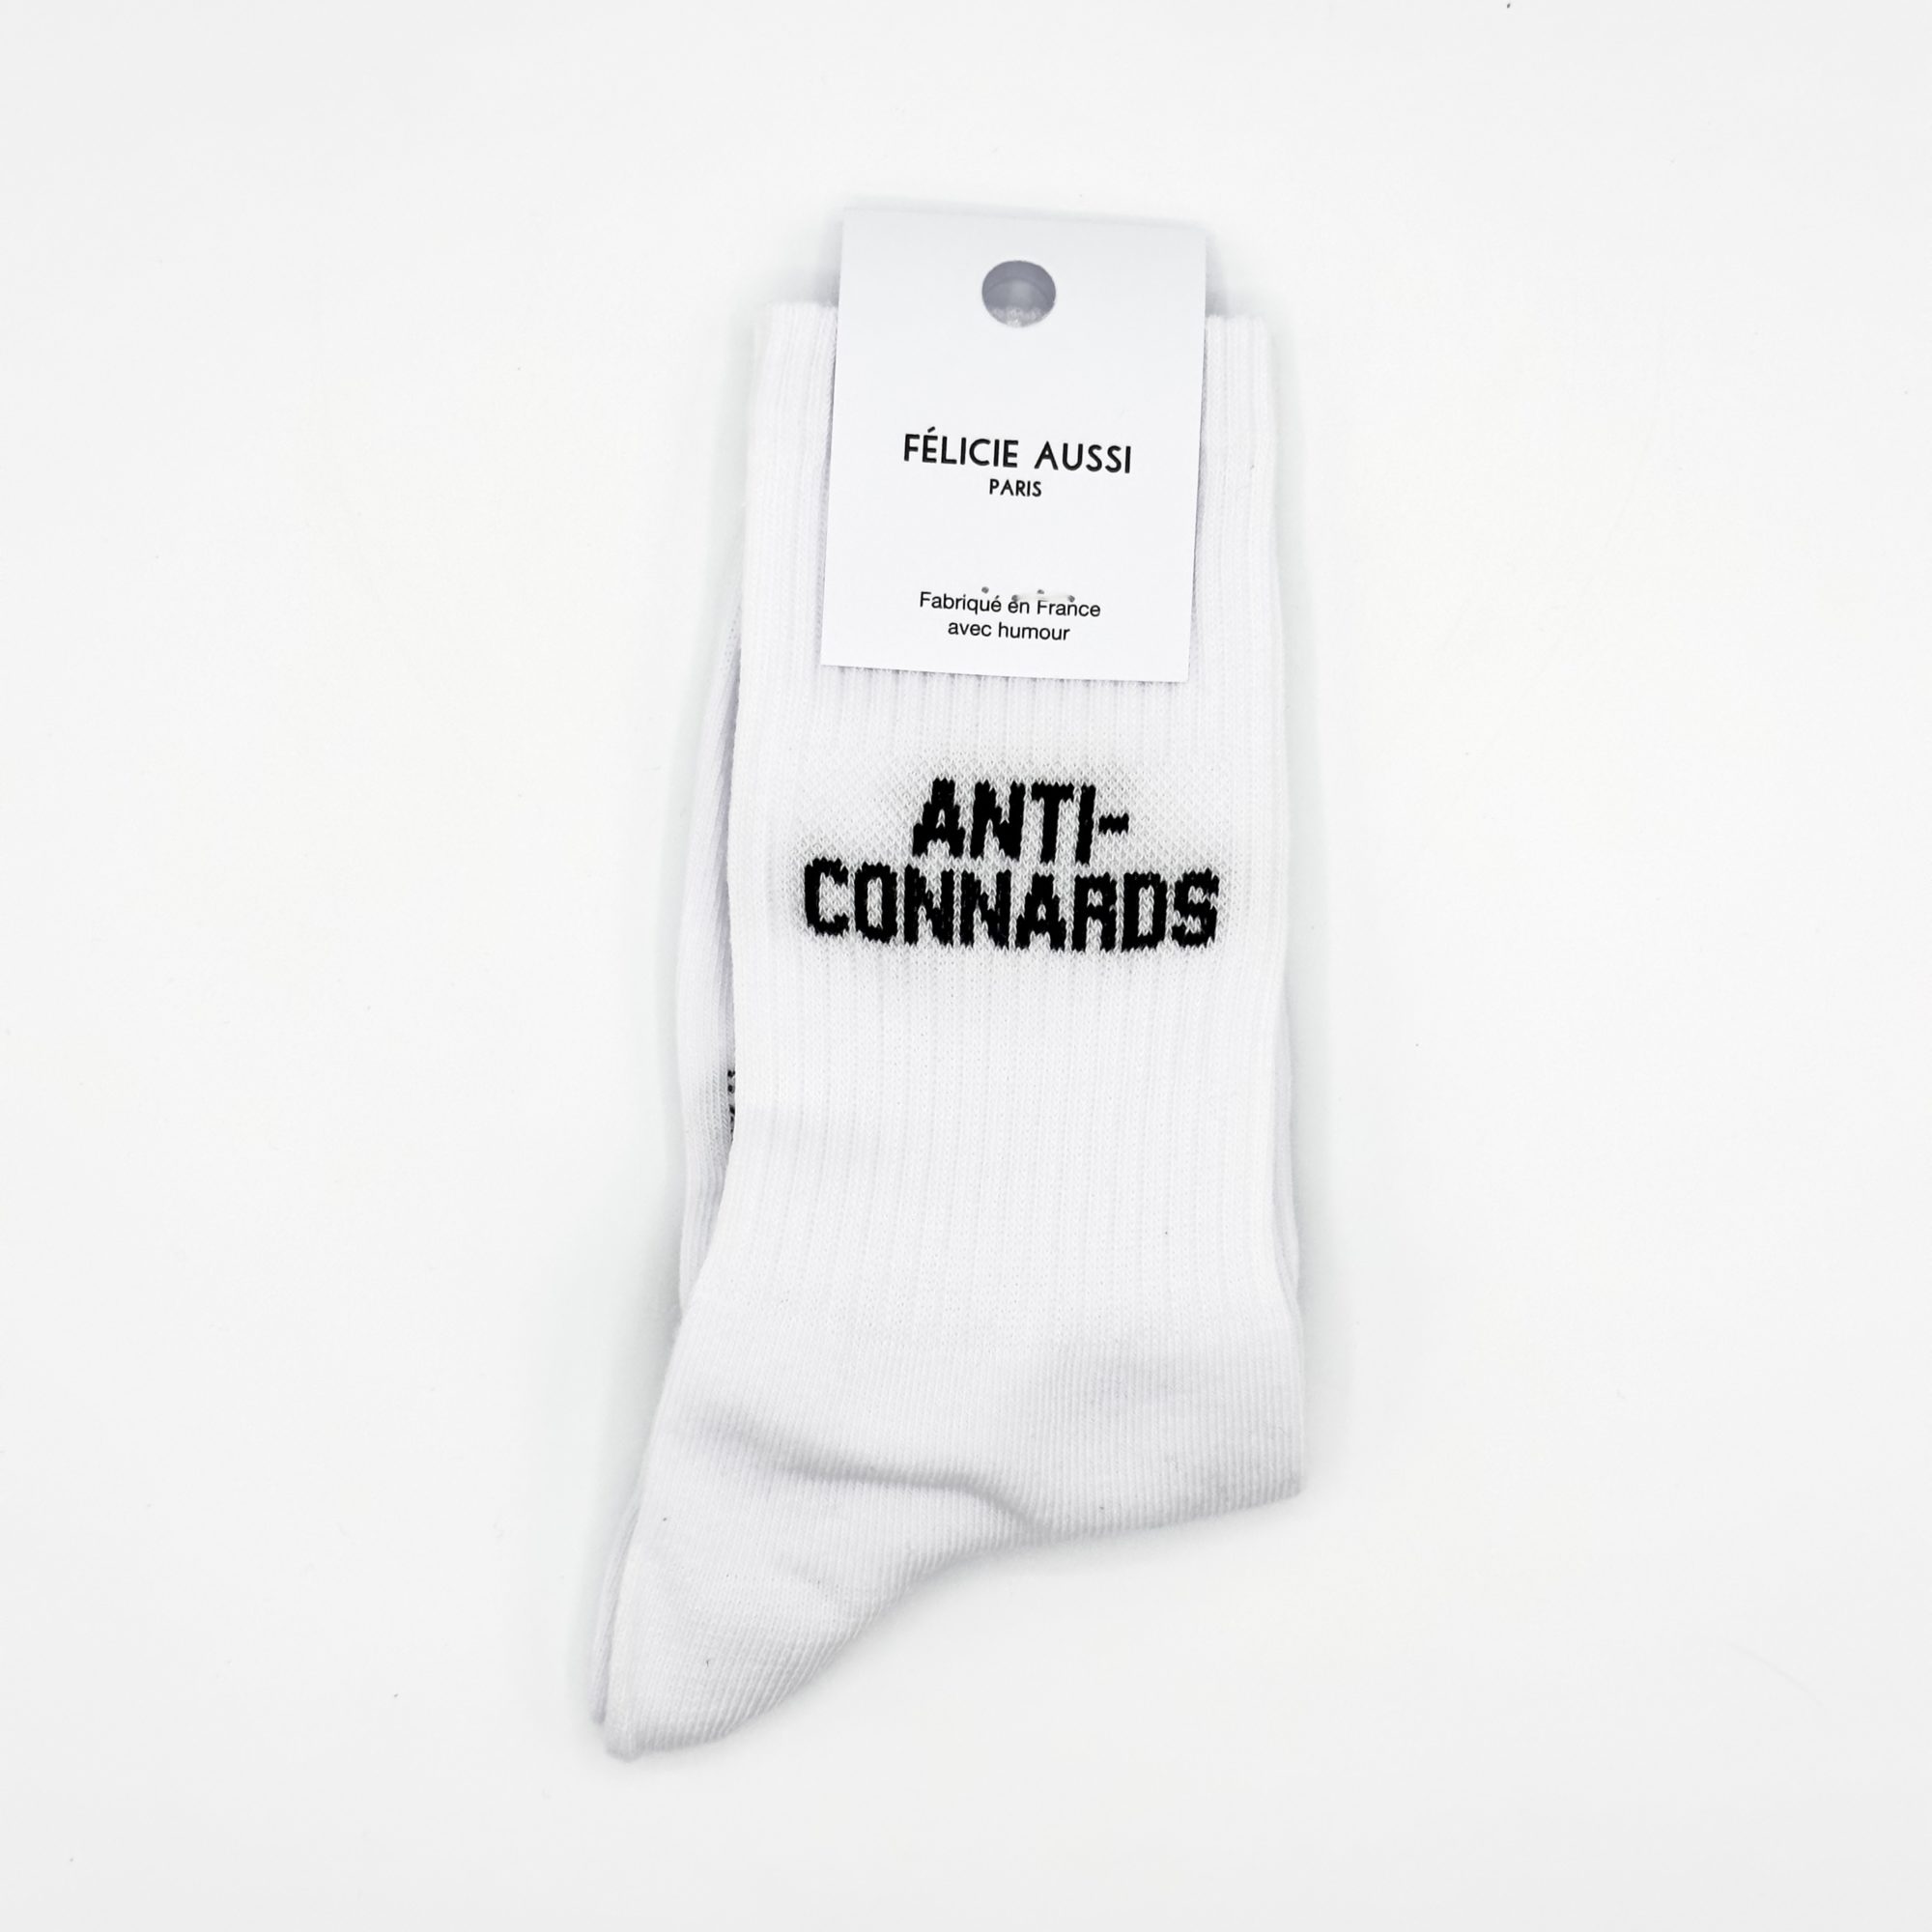 CHAUSSETTES ANTI-CONNARDS Taille : 36/40 - FÉLICIE AUSSI